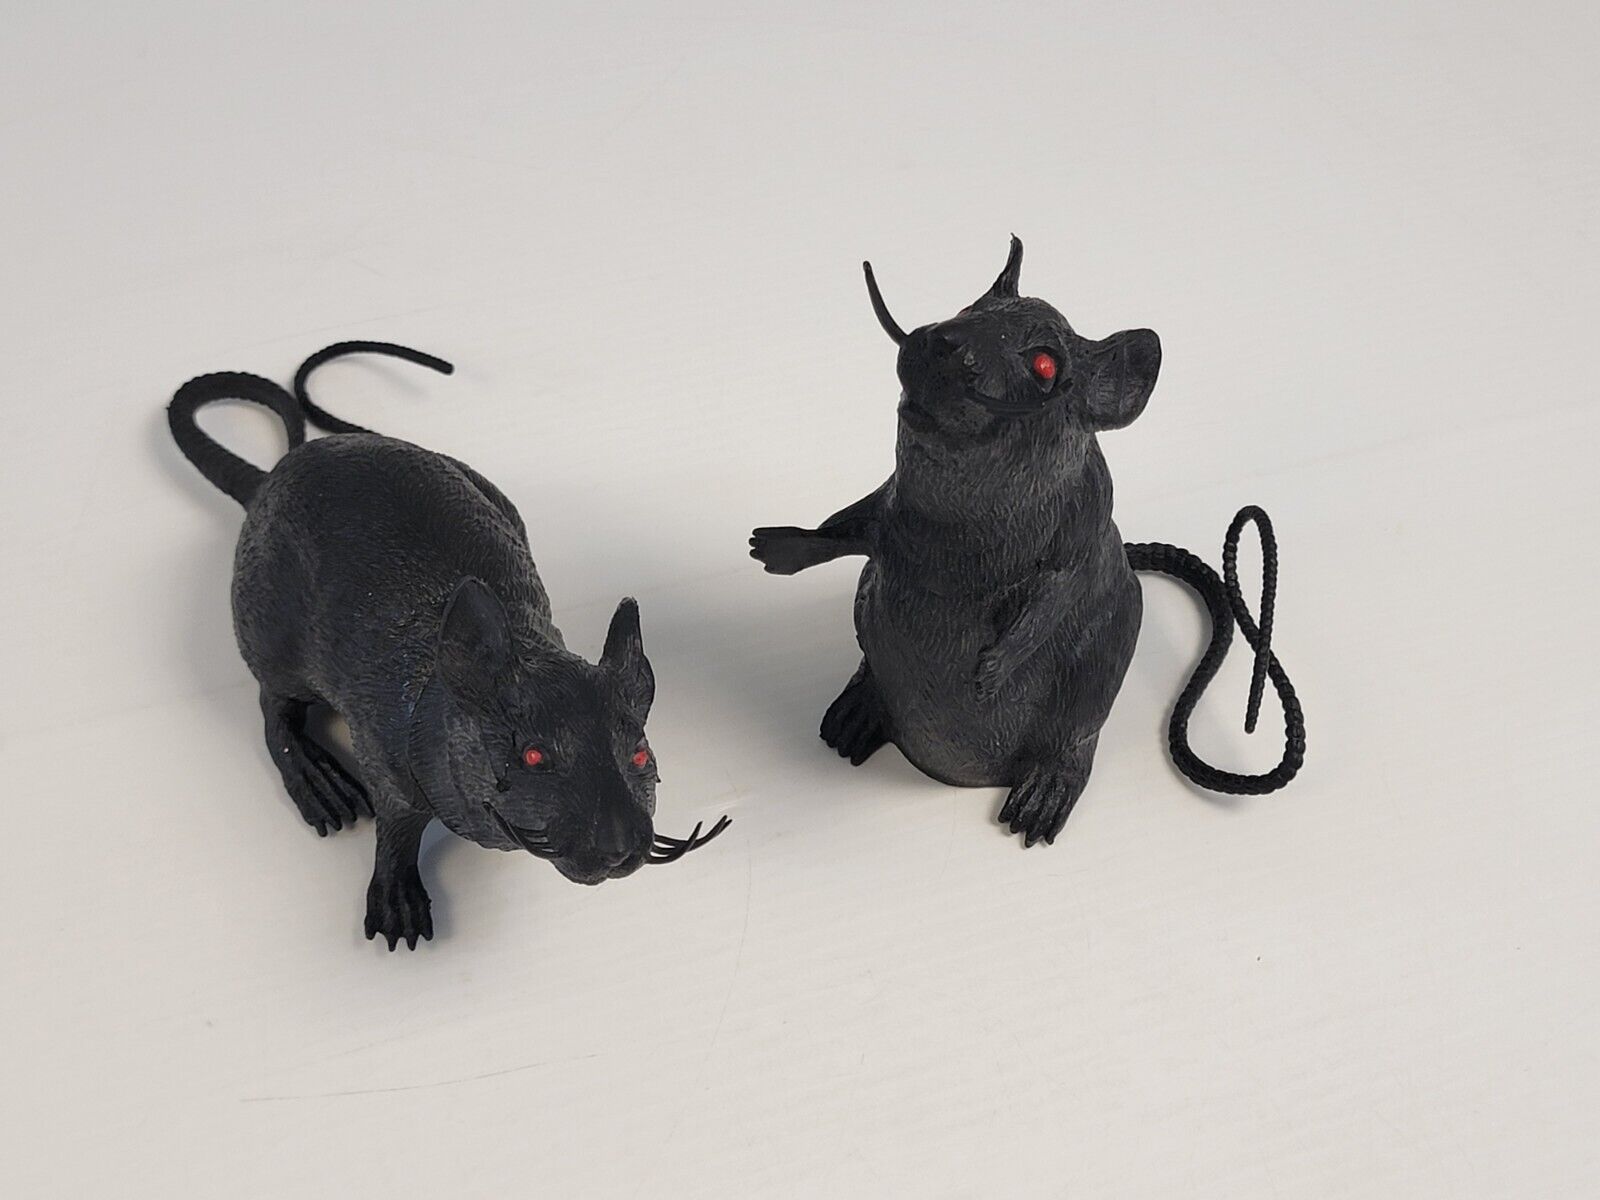 Squeaky Black Rats Halloween Decoration Creepy Realistic Greenbrier Vintage Toy